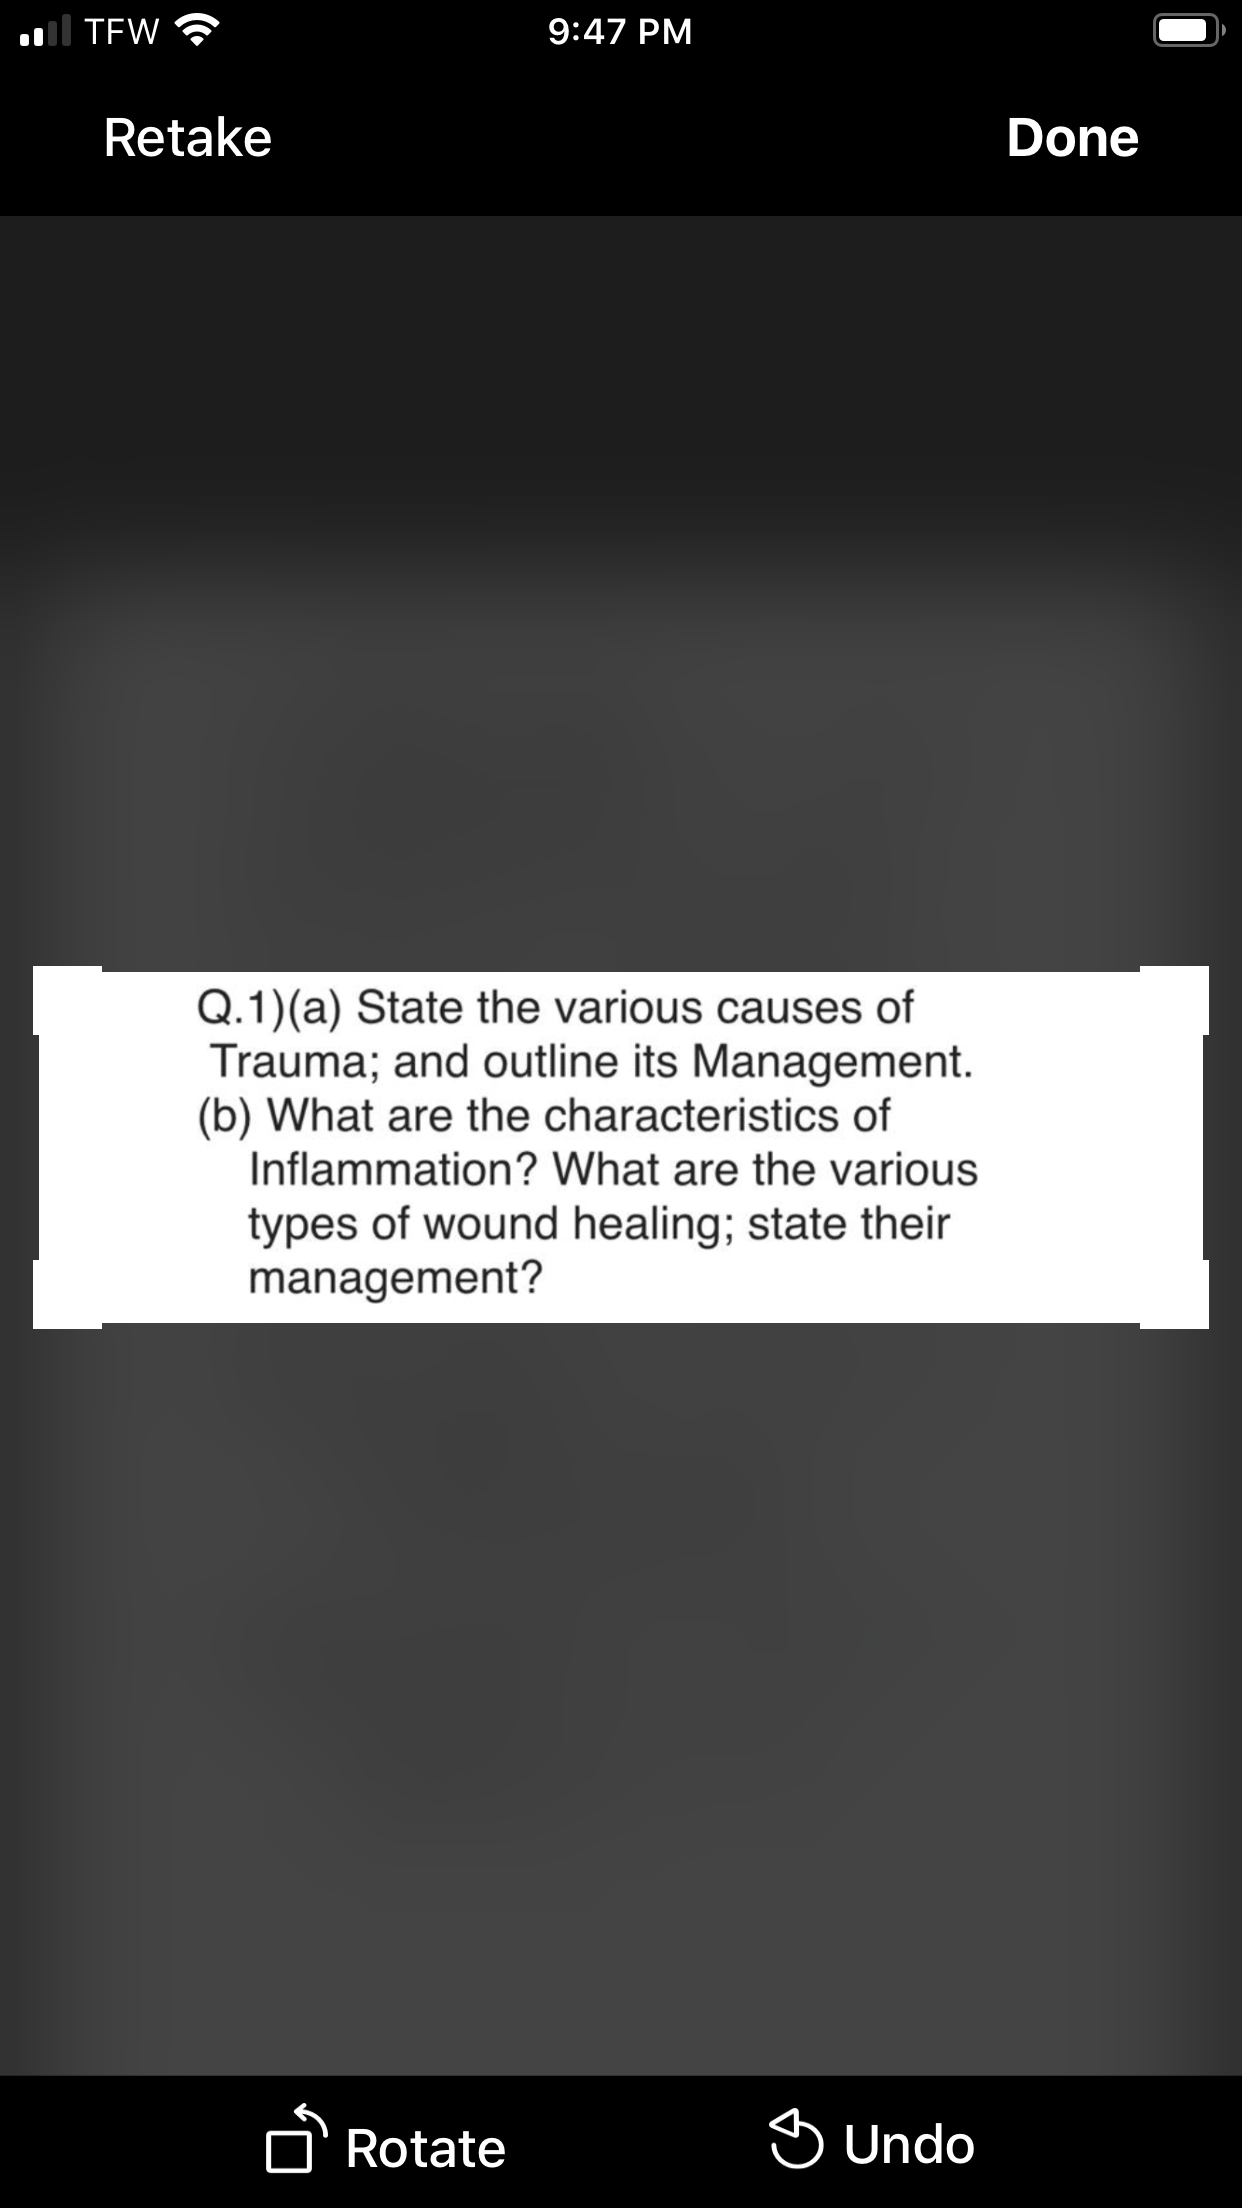 Q.1)(a) State the various causes of
Trauma; and outline its Management.
(b) What are the characteristics of
Inflammation? What are the various
types of wound healing; state their
management?
